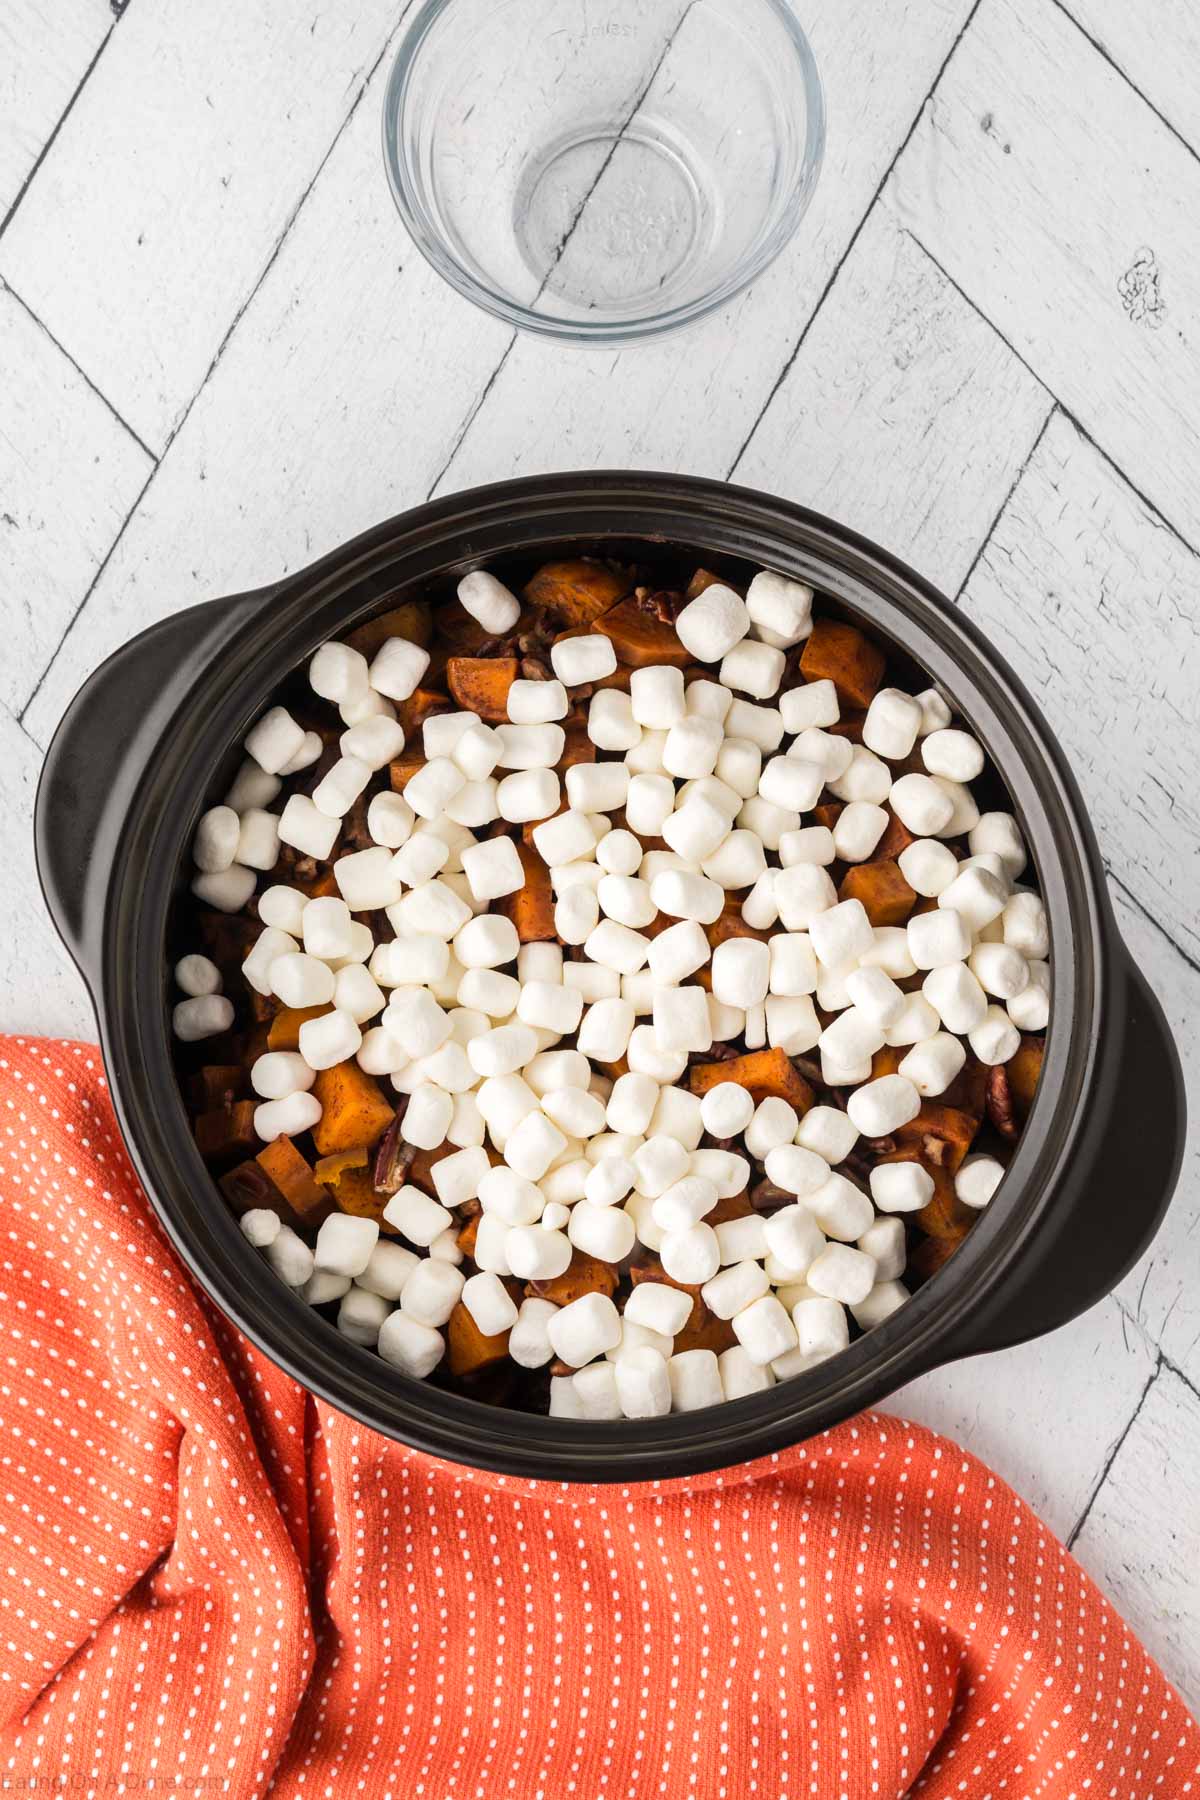 The marshmallow topped on the sweet potatoes in the crock pot.  